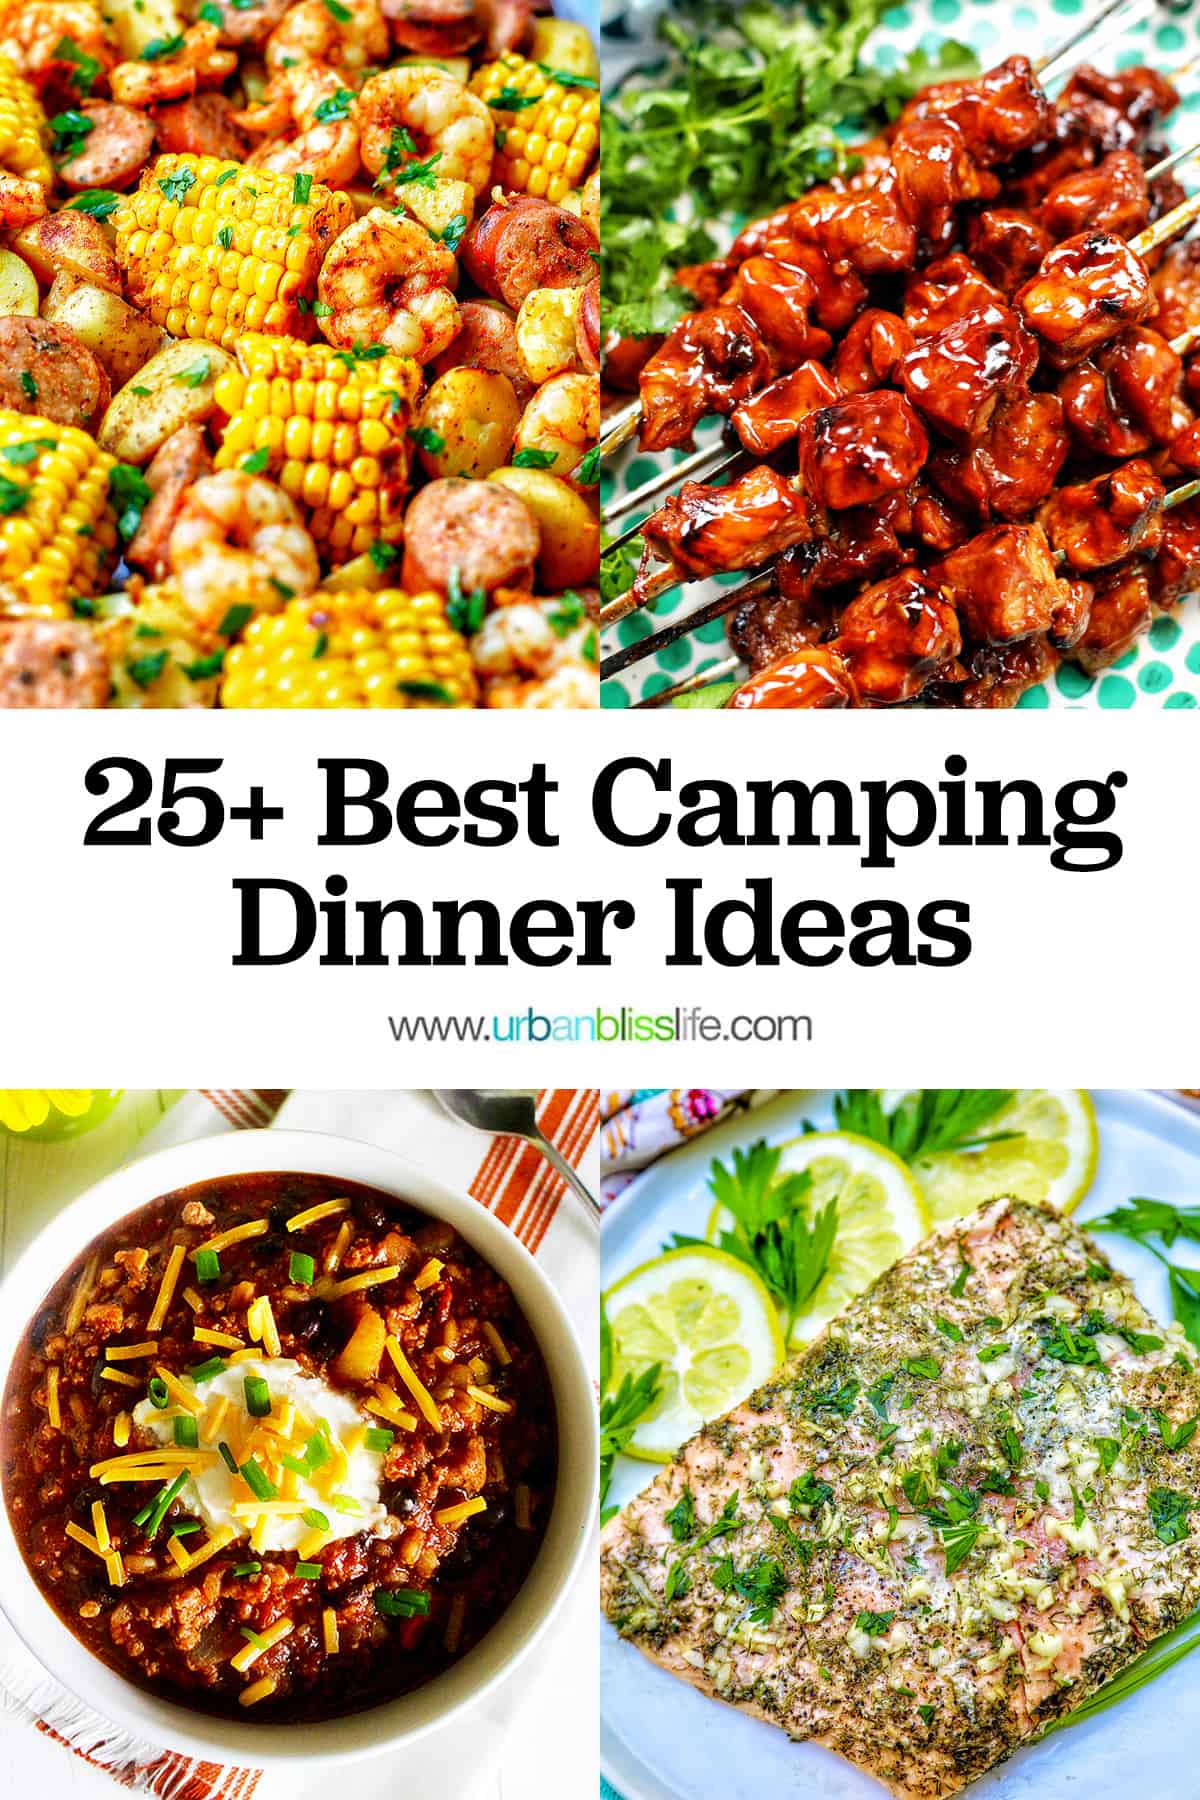 seafood boil foil packets, filipino pork BBQ skewers, dutch oven chili, and grilled salmon with title text that reads "25+ Best Camping Dinner Ideas."